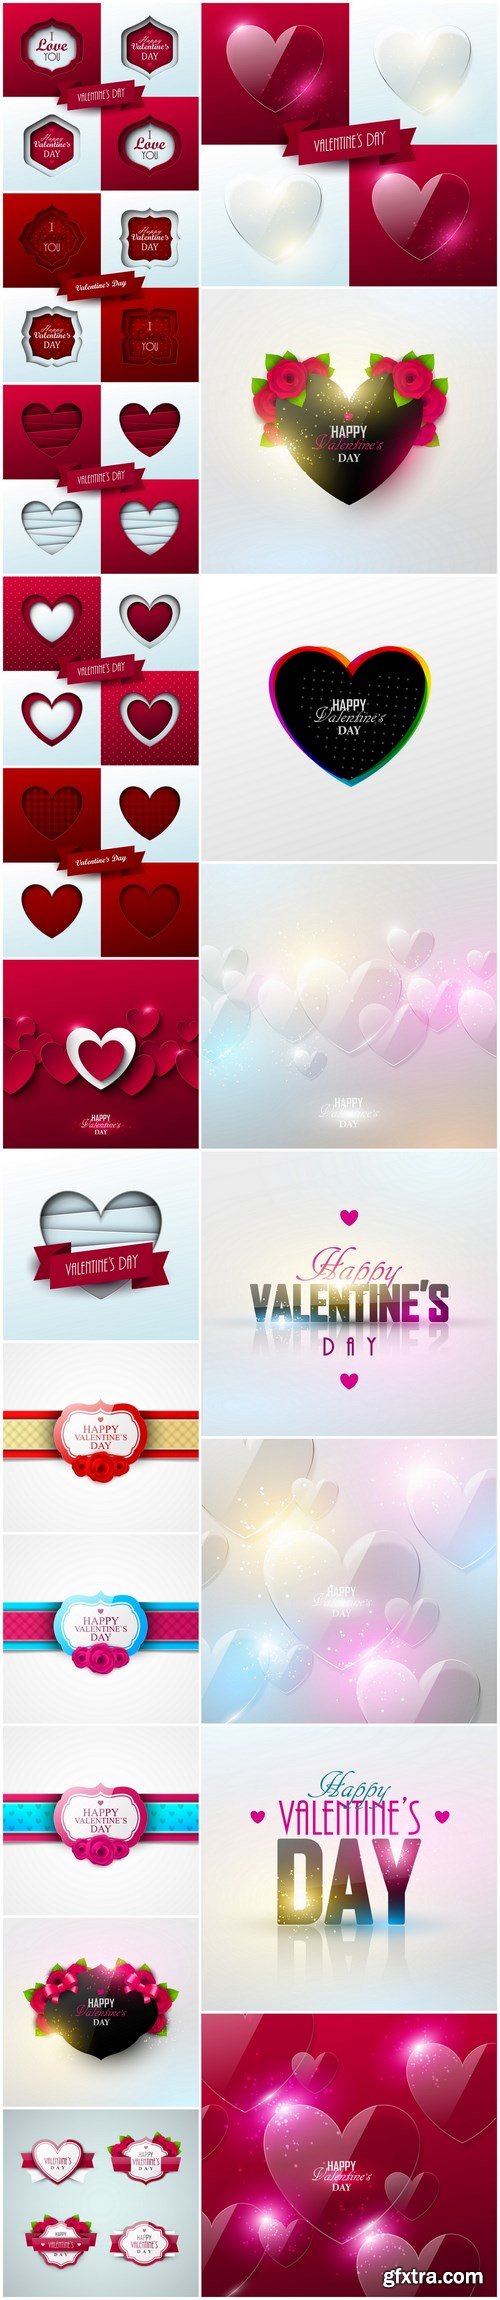 Heart & Love - Happy Valentines Day - Set of http://www.filenext.com/1tugz6bnyd3r/Heart_&_Love_-_Happy_Valentines_Day_-_Set_of_20xEPS_Professional_Vector_Stock.rar.html Professional Vector Stock (Копировать)